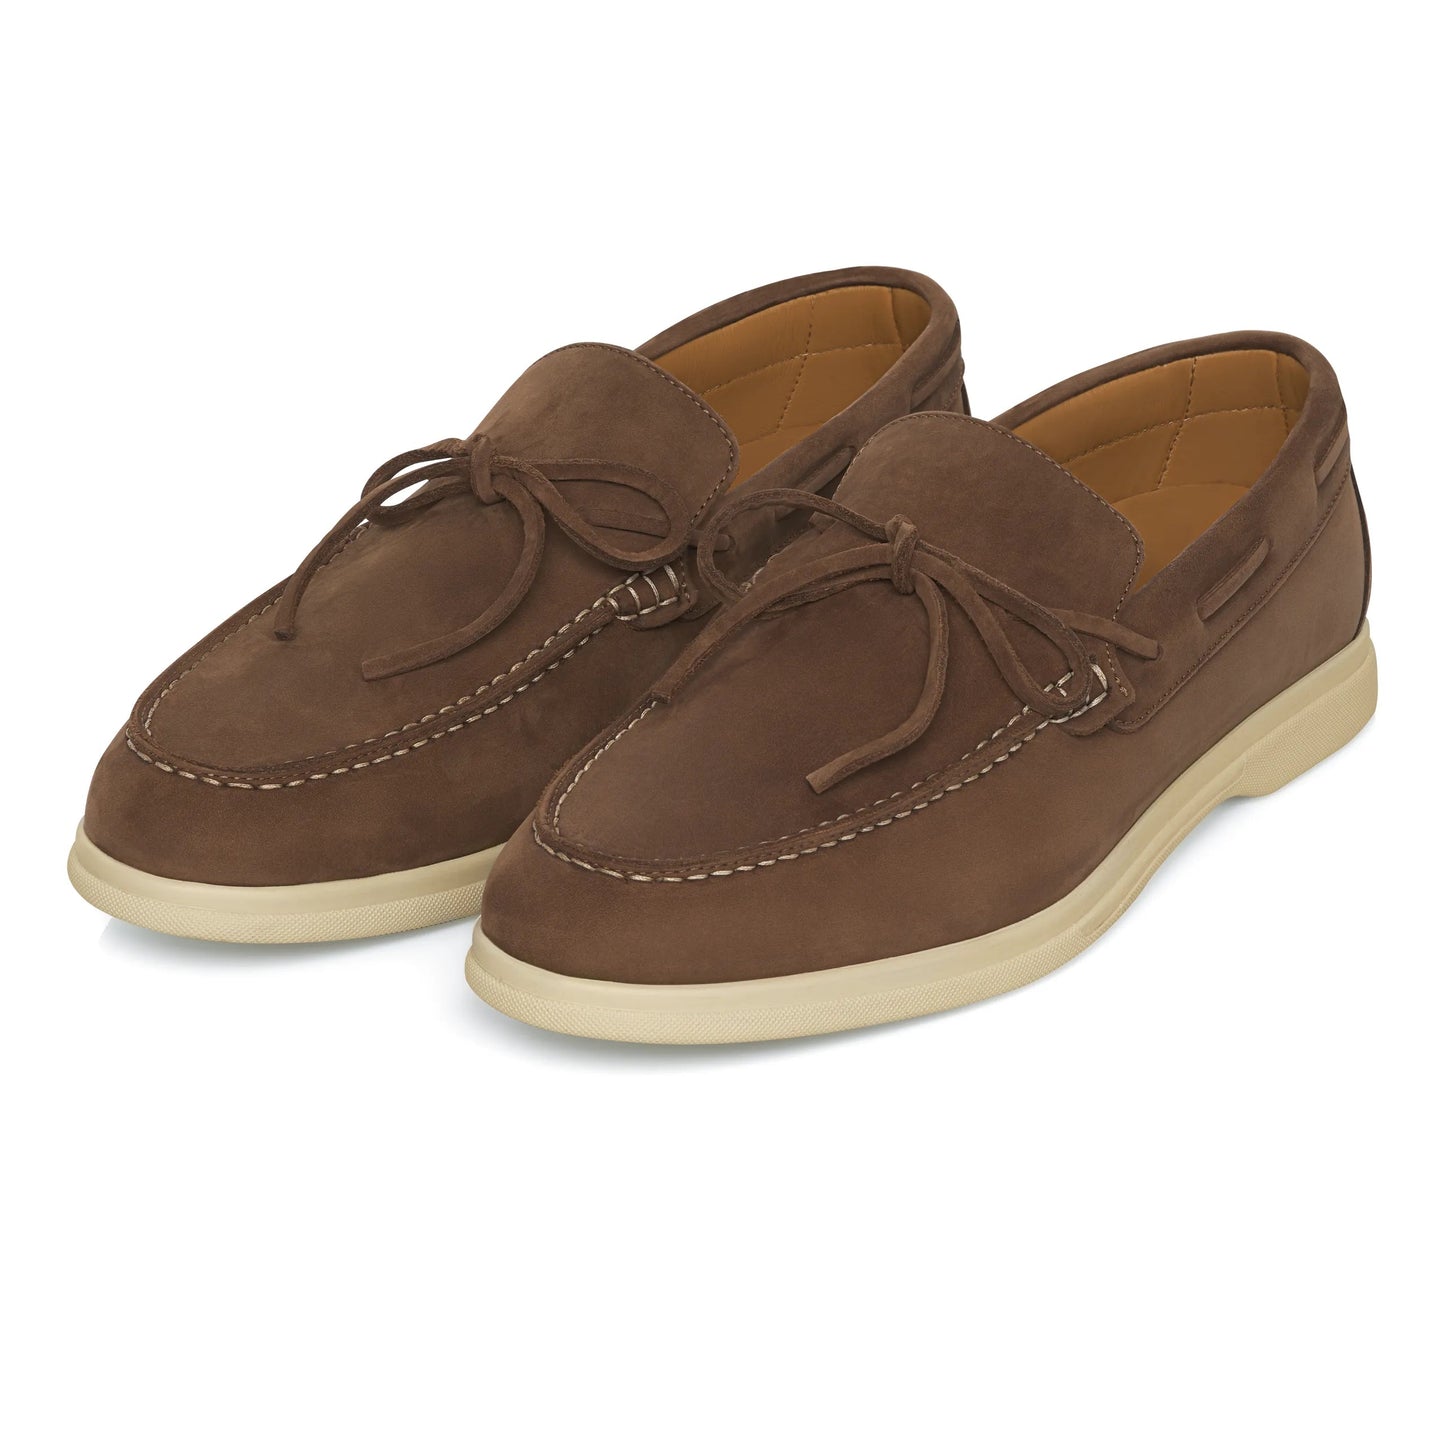 Mandelli Leather Loafer in Earth Brown with a Bow - SARTALE